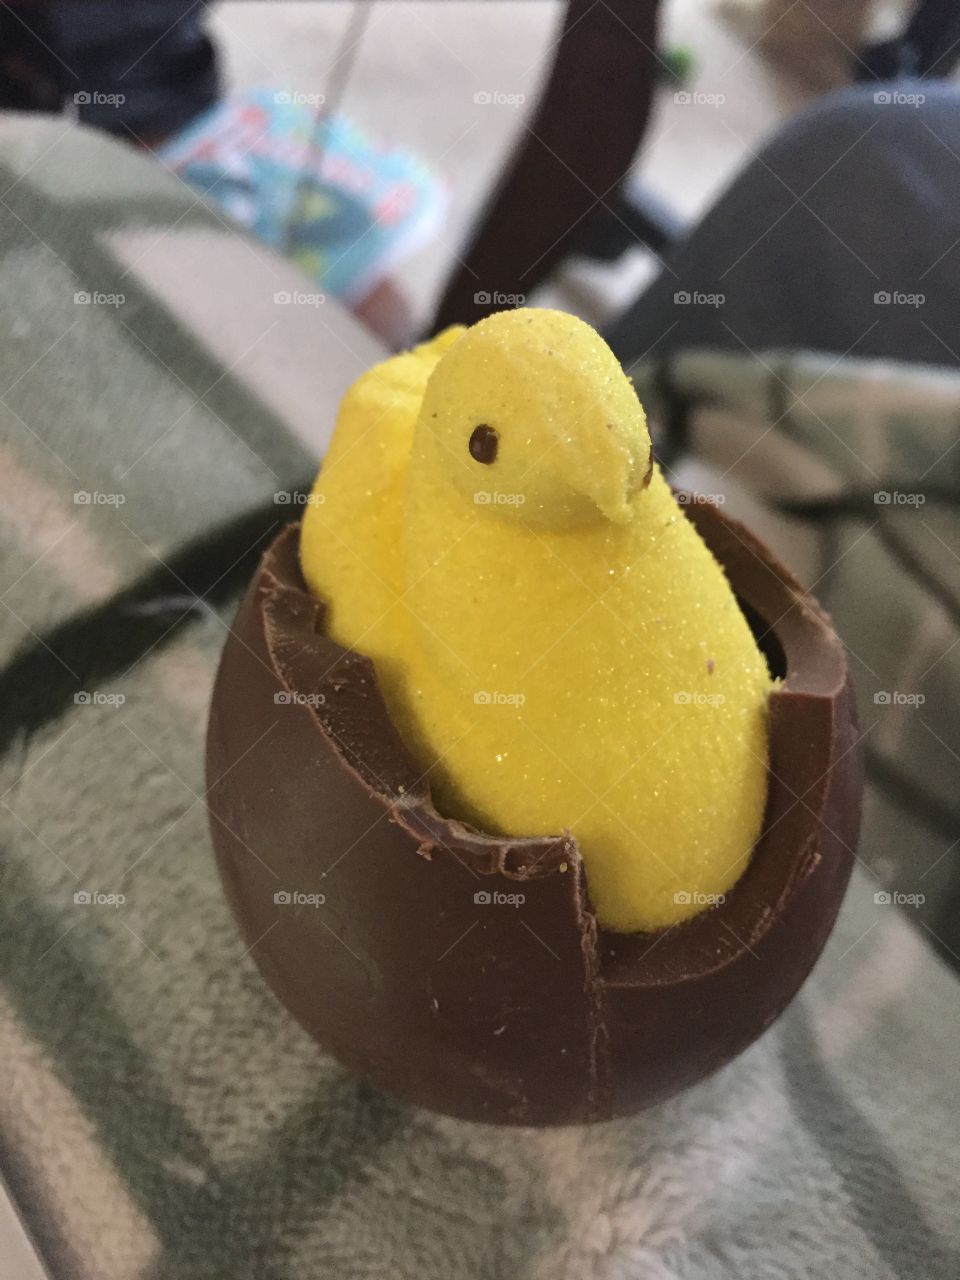 Easter is approaching and I couldn't resist showing a good peep in its own space.